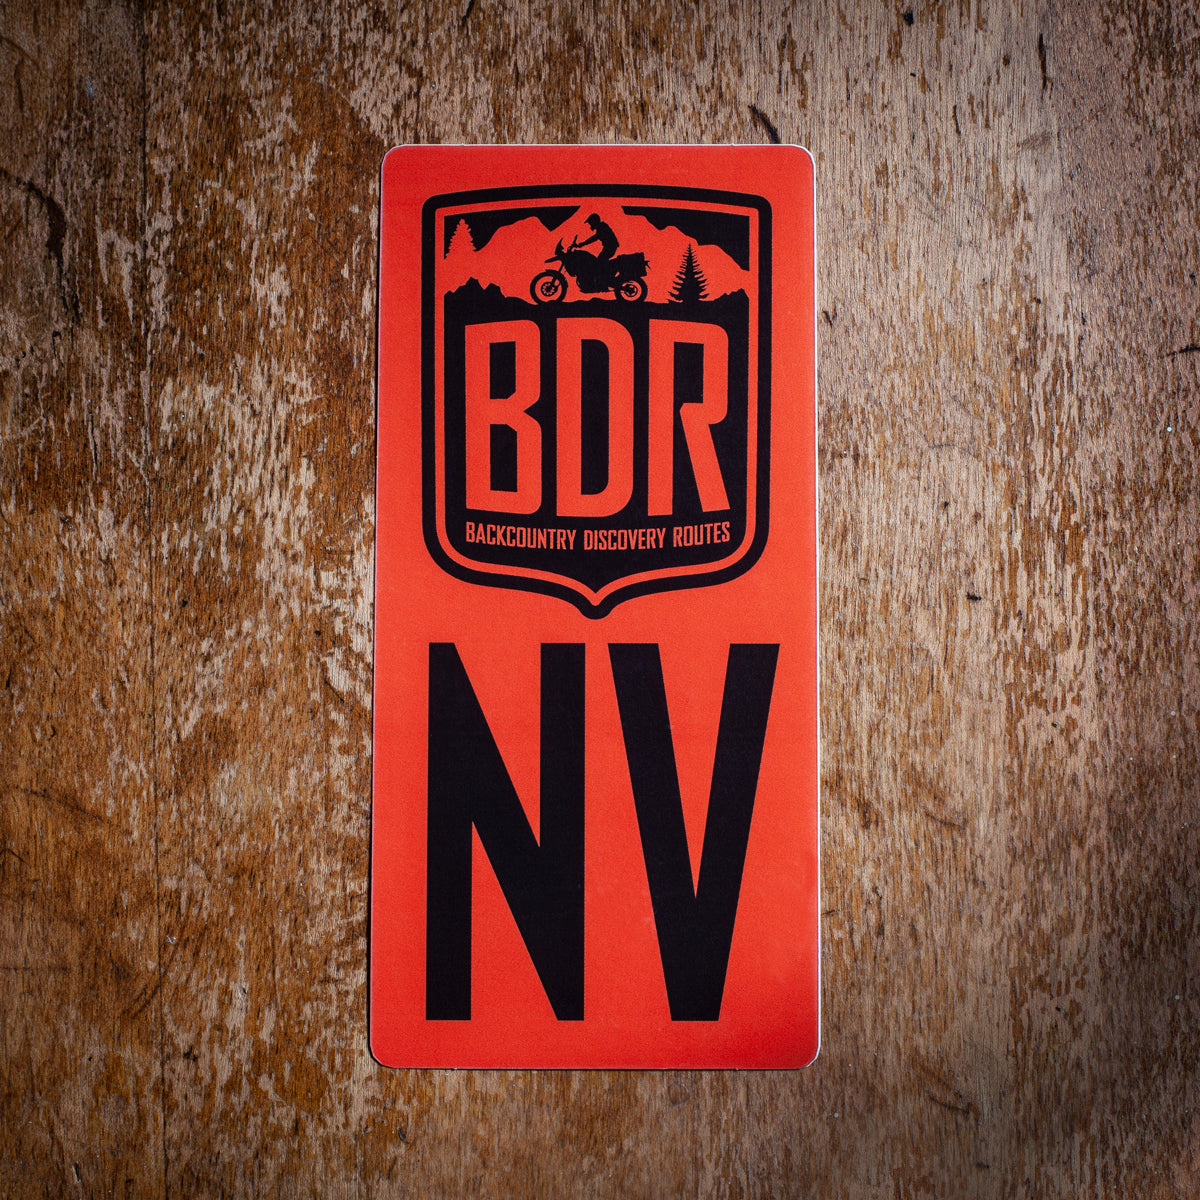 NVBDR Route Decal